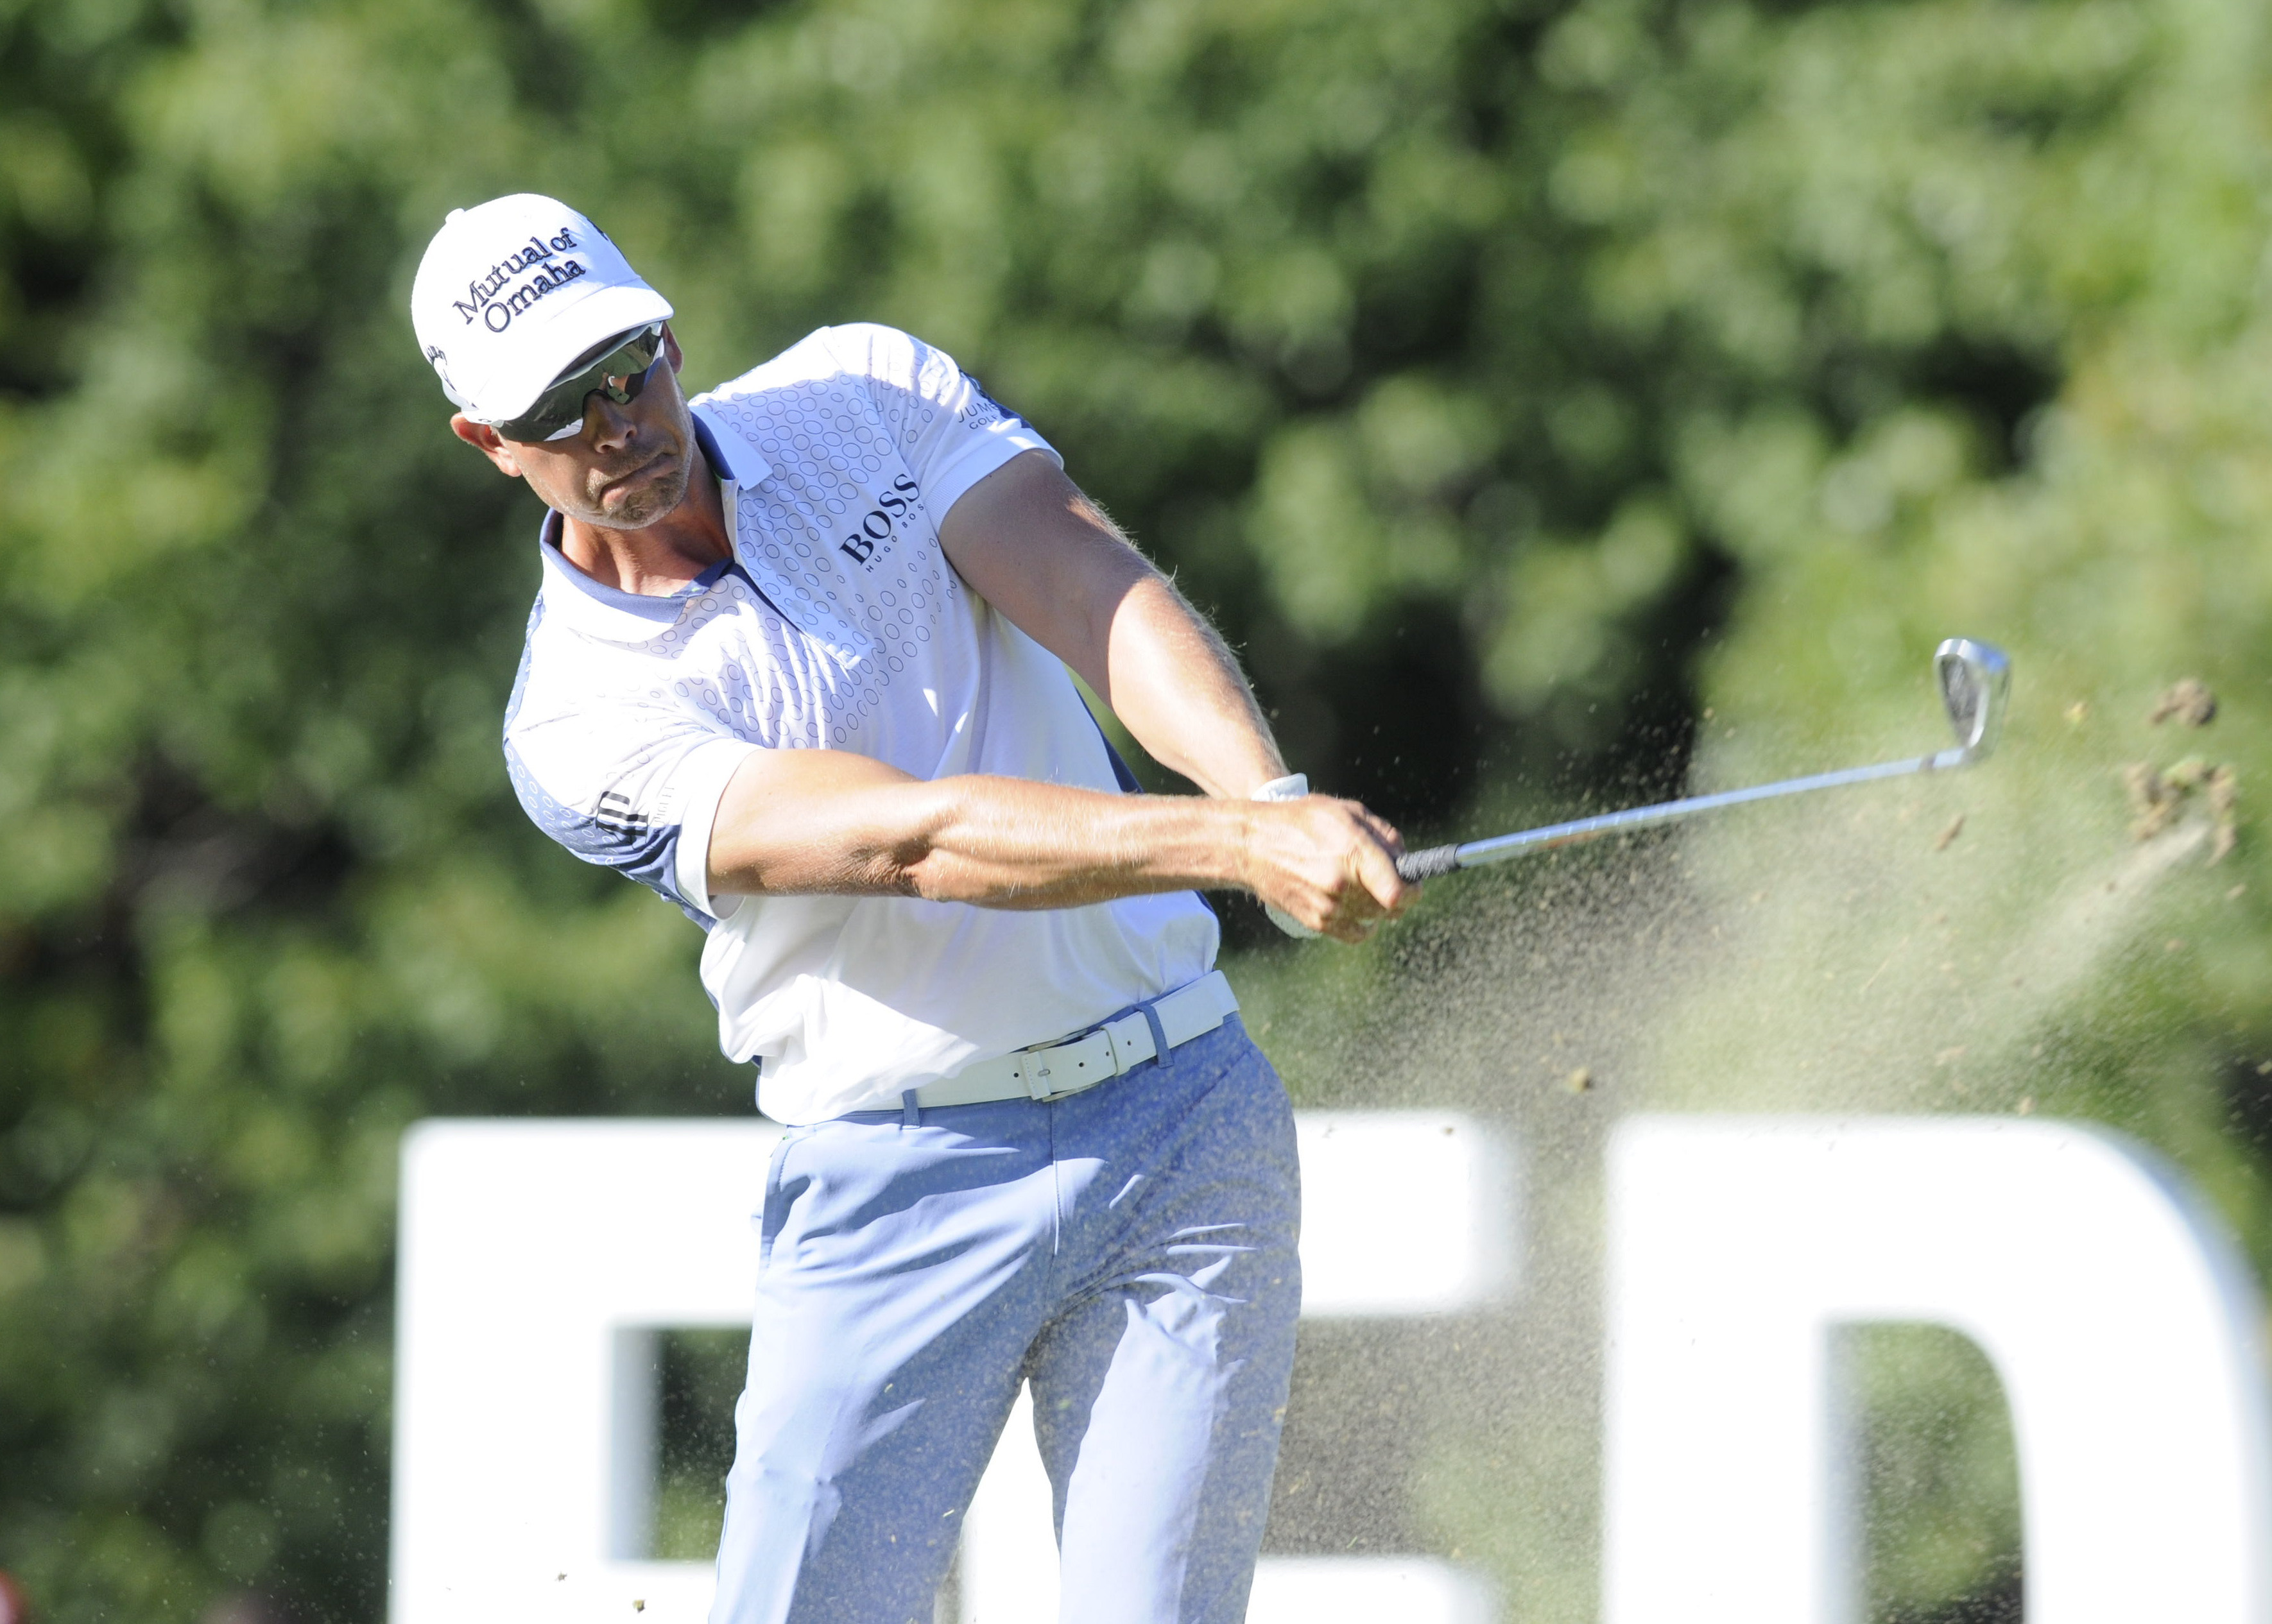 Henrik Stenson hits his tee shot on the 16th hole. Photo: USA Today Sports